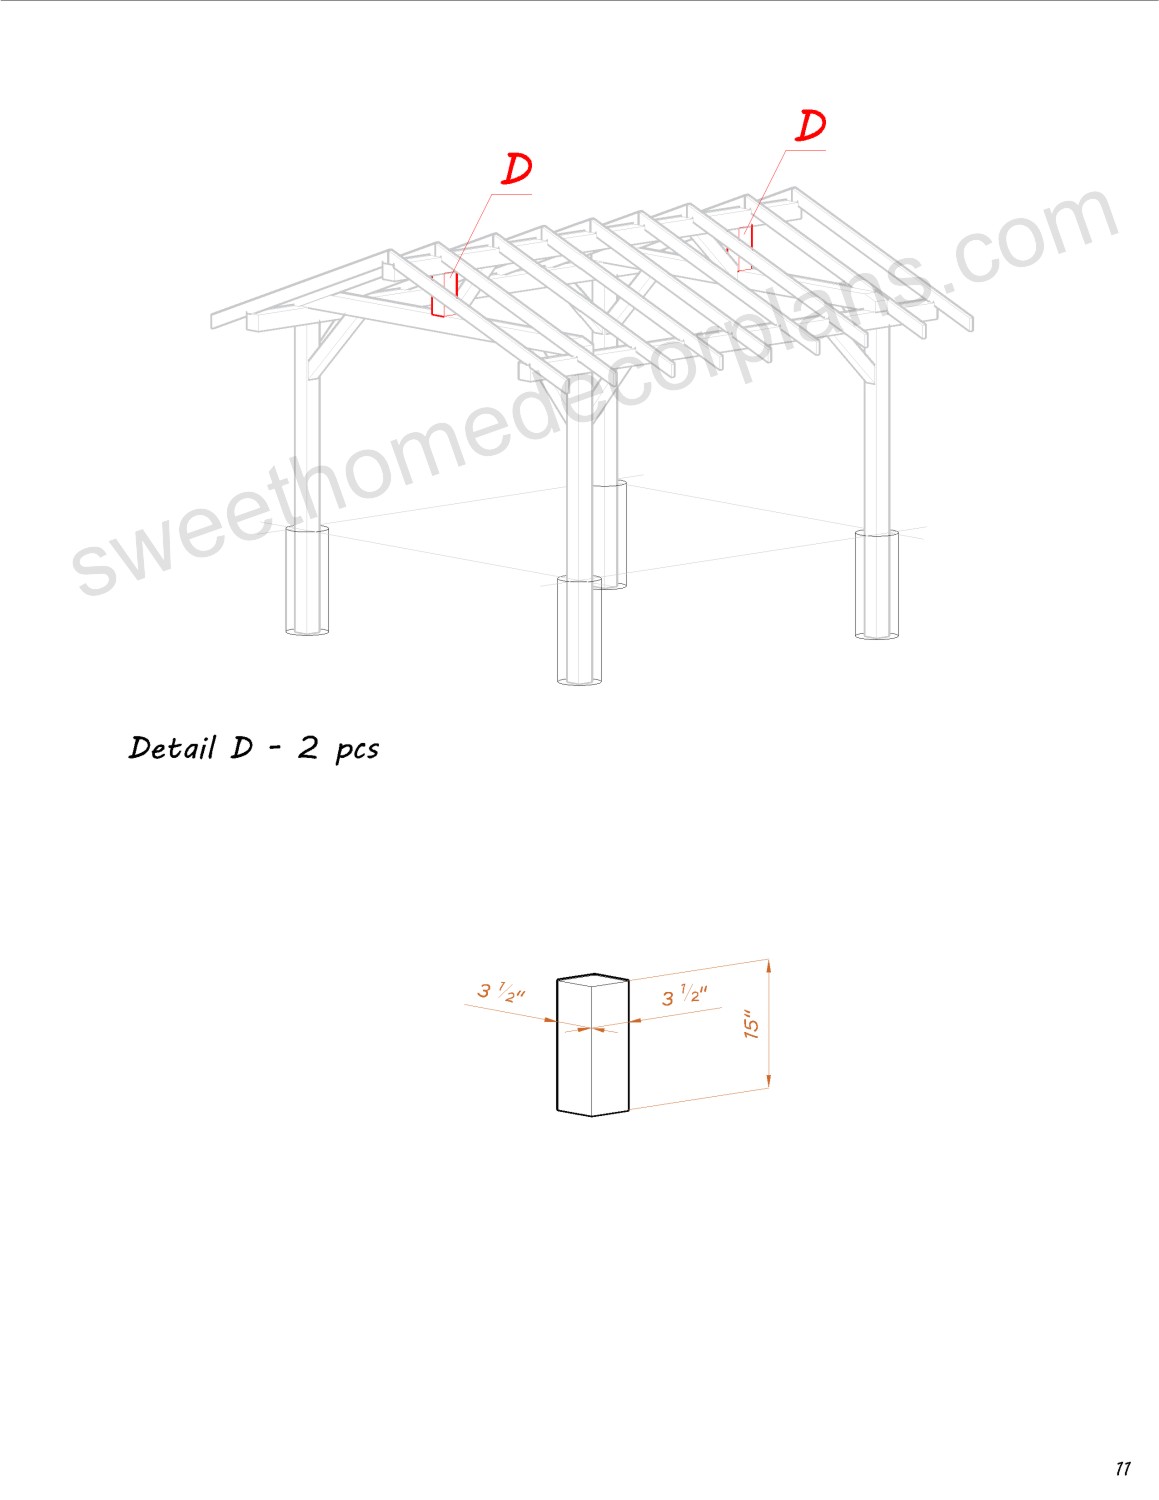 Assembly-diagram-for-wooden-10-x-12-gable-pavilion-plans-in-pdf-for-outdoor